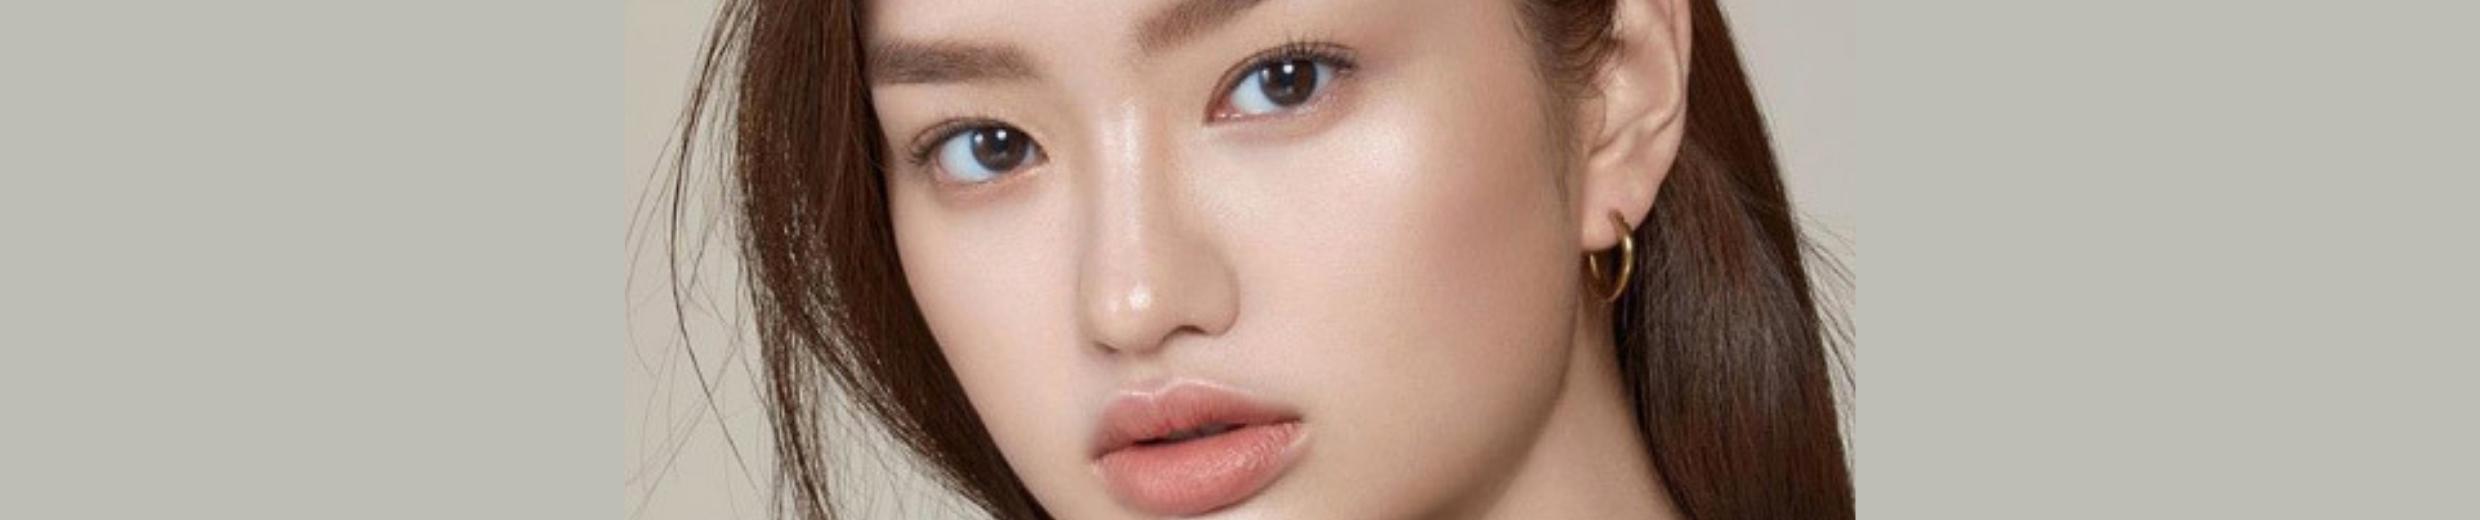 The Skincare as Makeup Look Is Everything RN — Here's How to Get It